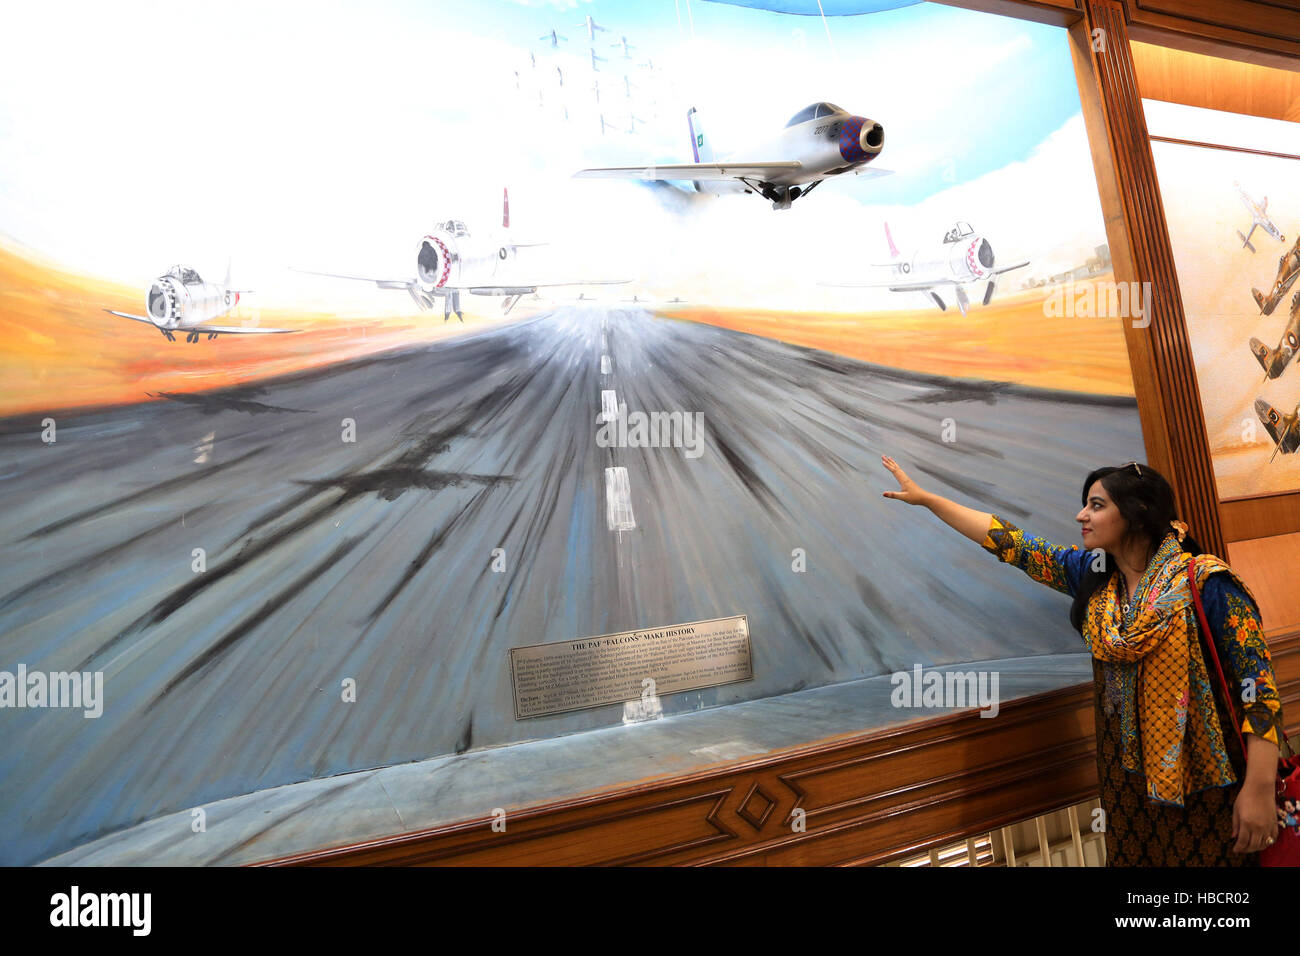 Karachi, Pakistan. 6th Dec, 2016. A visitor views a painting in the Pakistan Air Force Museum in Karachi, south Pakistan, Dec. 6, 2016. The museum was established in 1990 in two disused hangars. © Ahmad Kamal/Xinhua/Alamy Live News Stock Photo